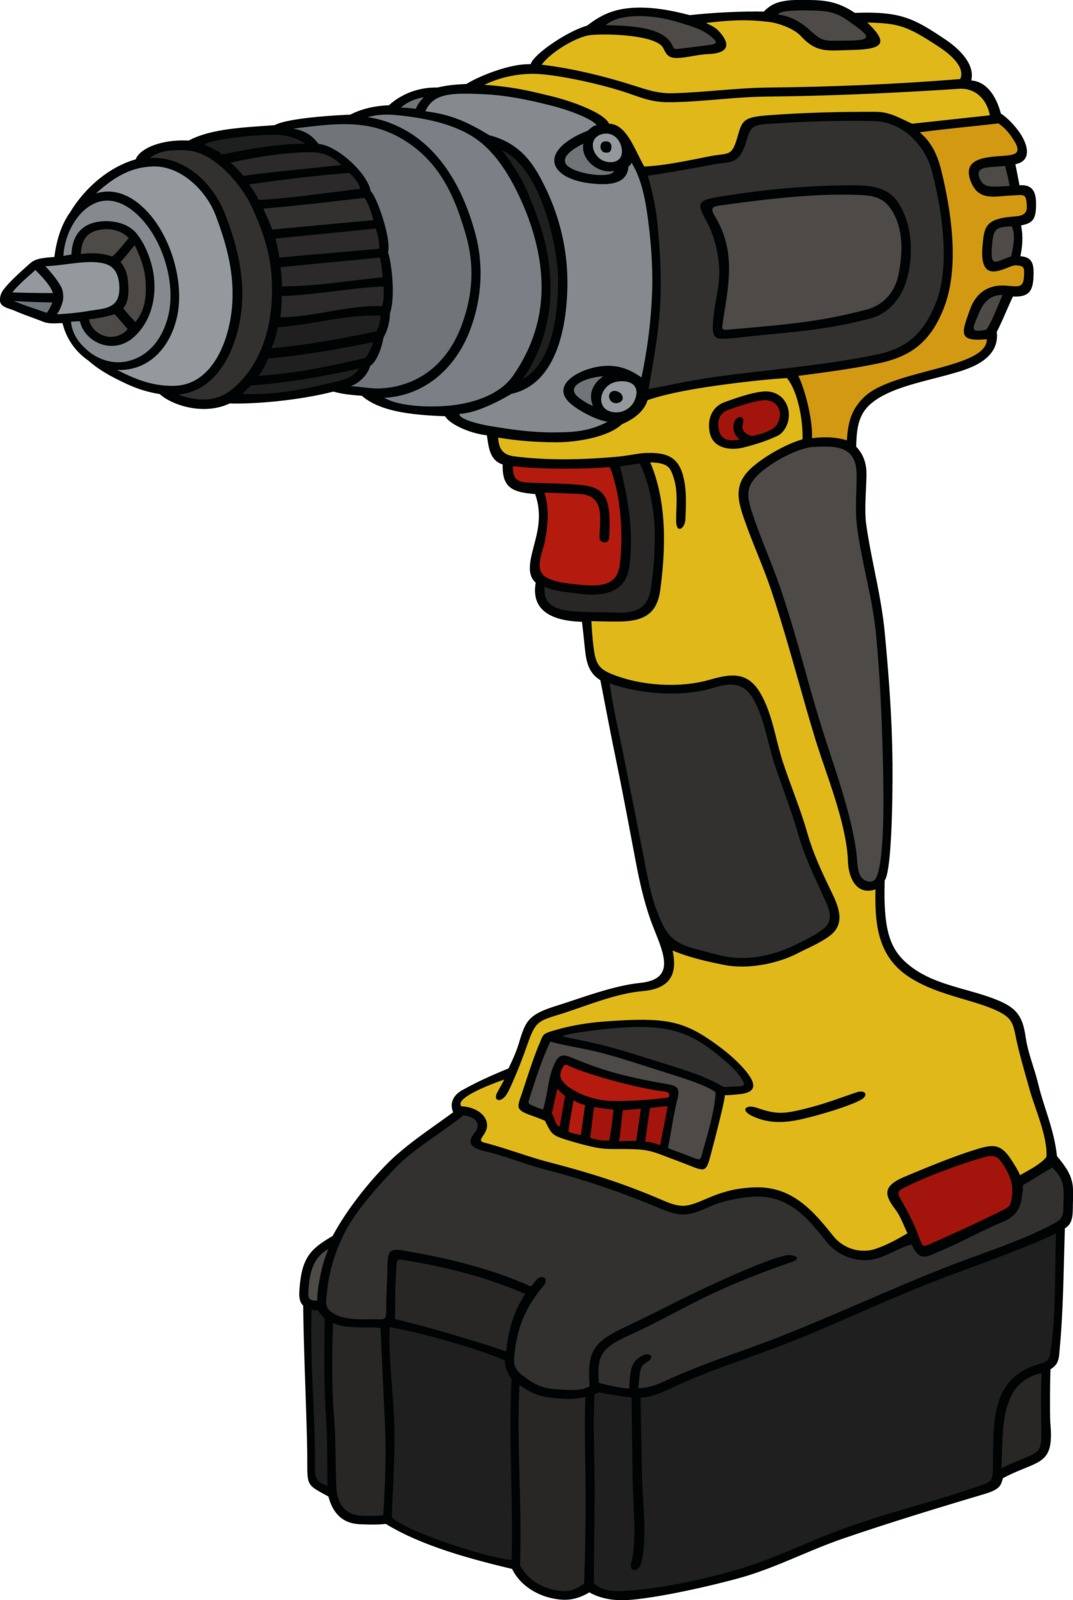 The vectorized hand drawing of a yellow cordless screwdriver